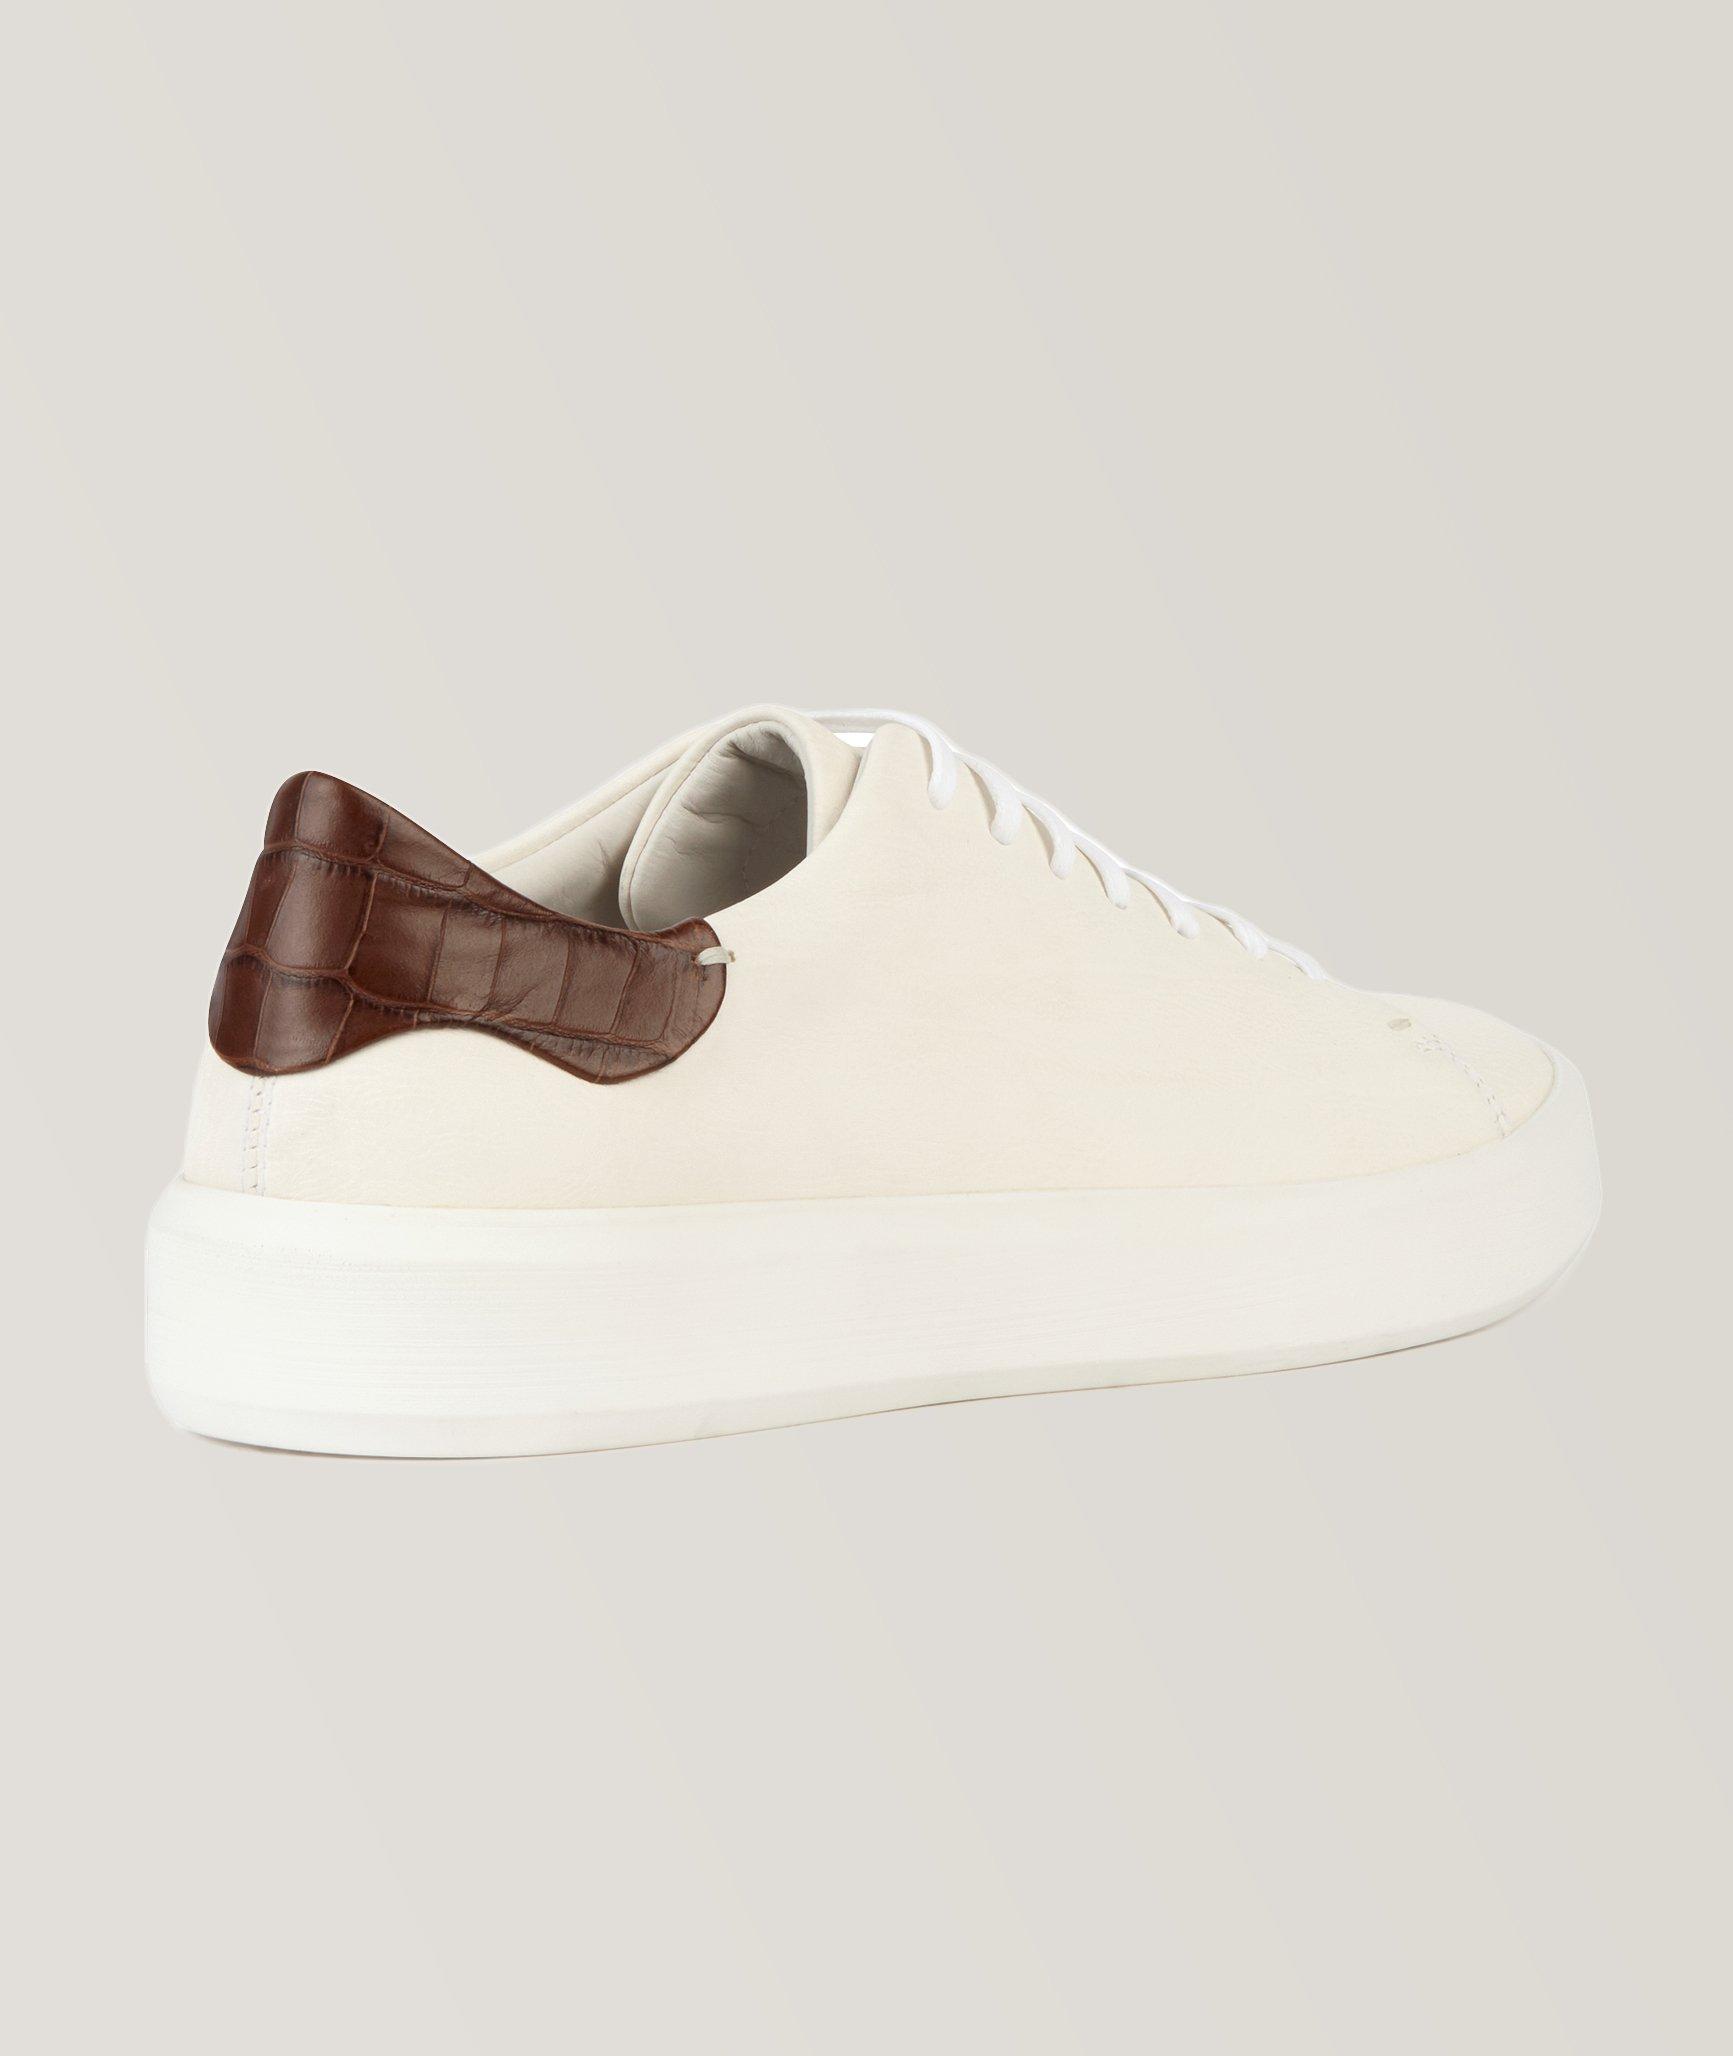 Velletri Mixed Materials Sneakers image 3